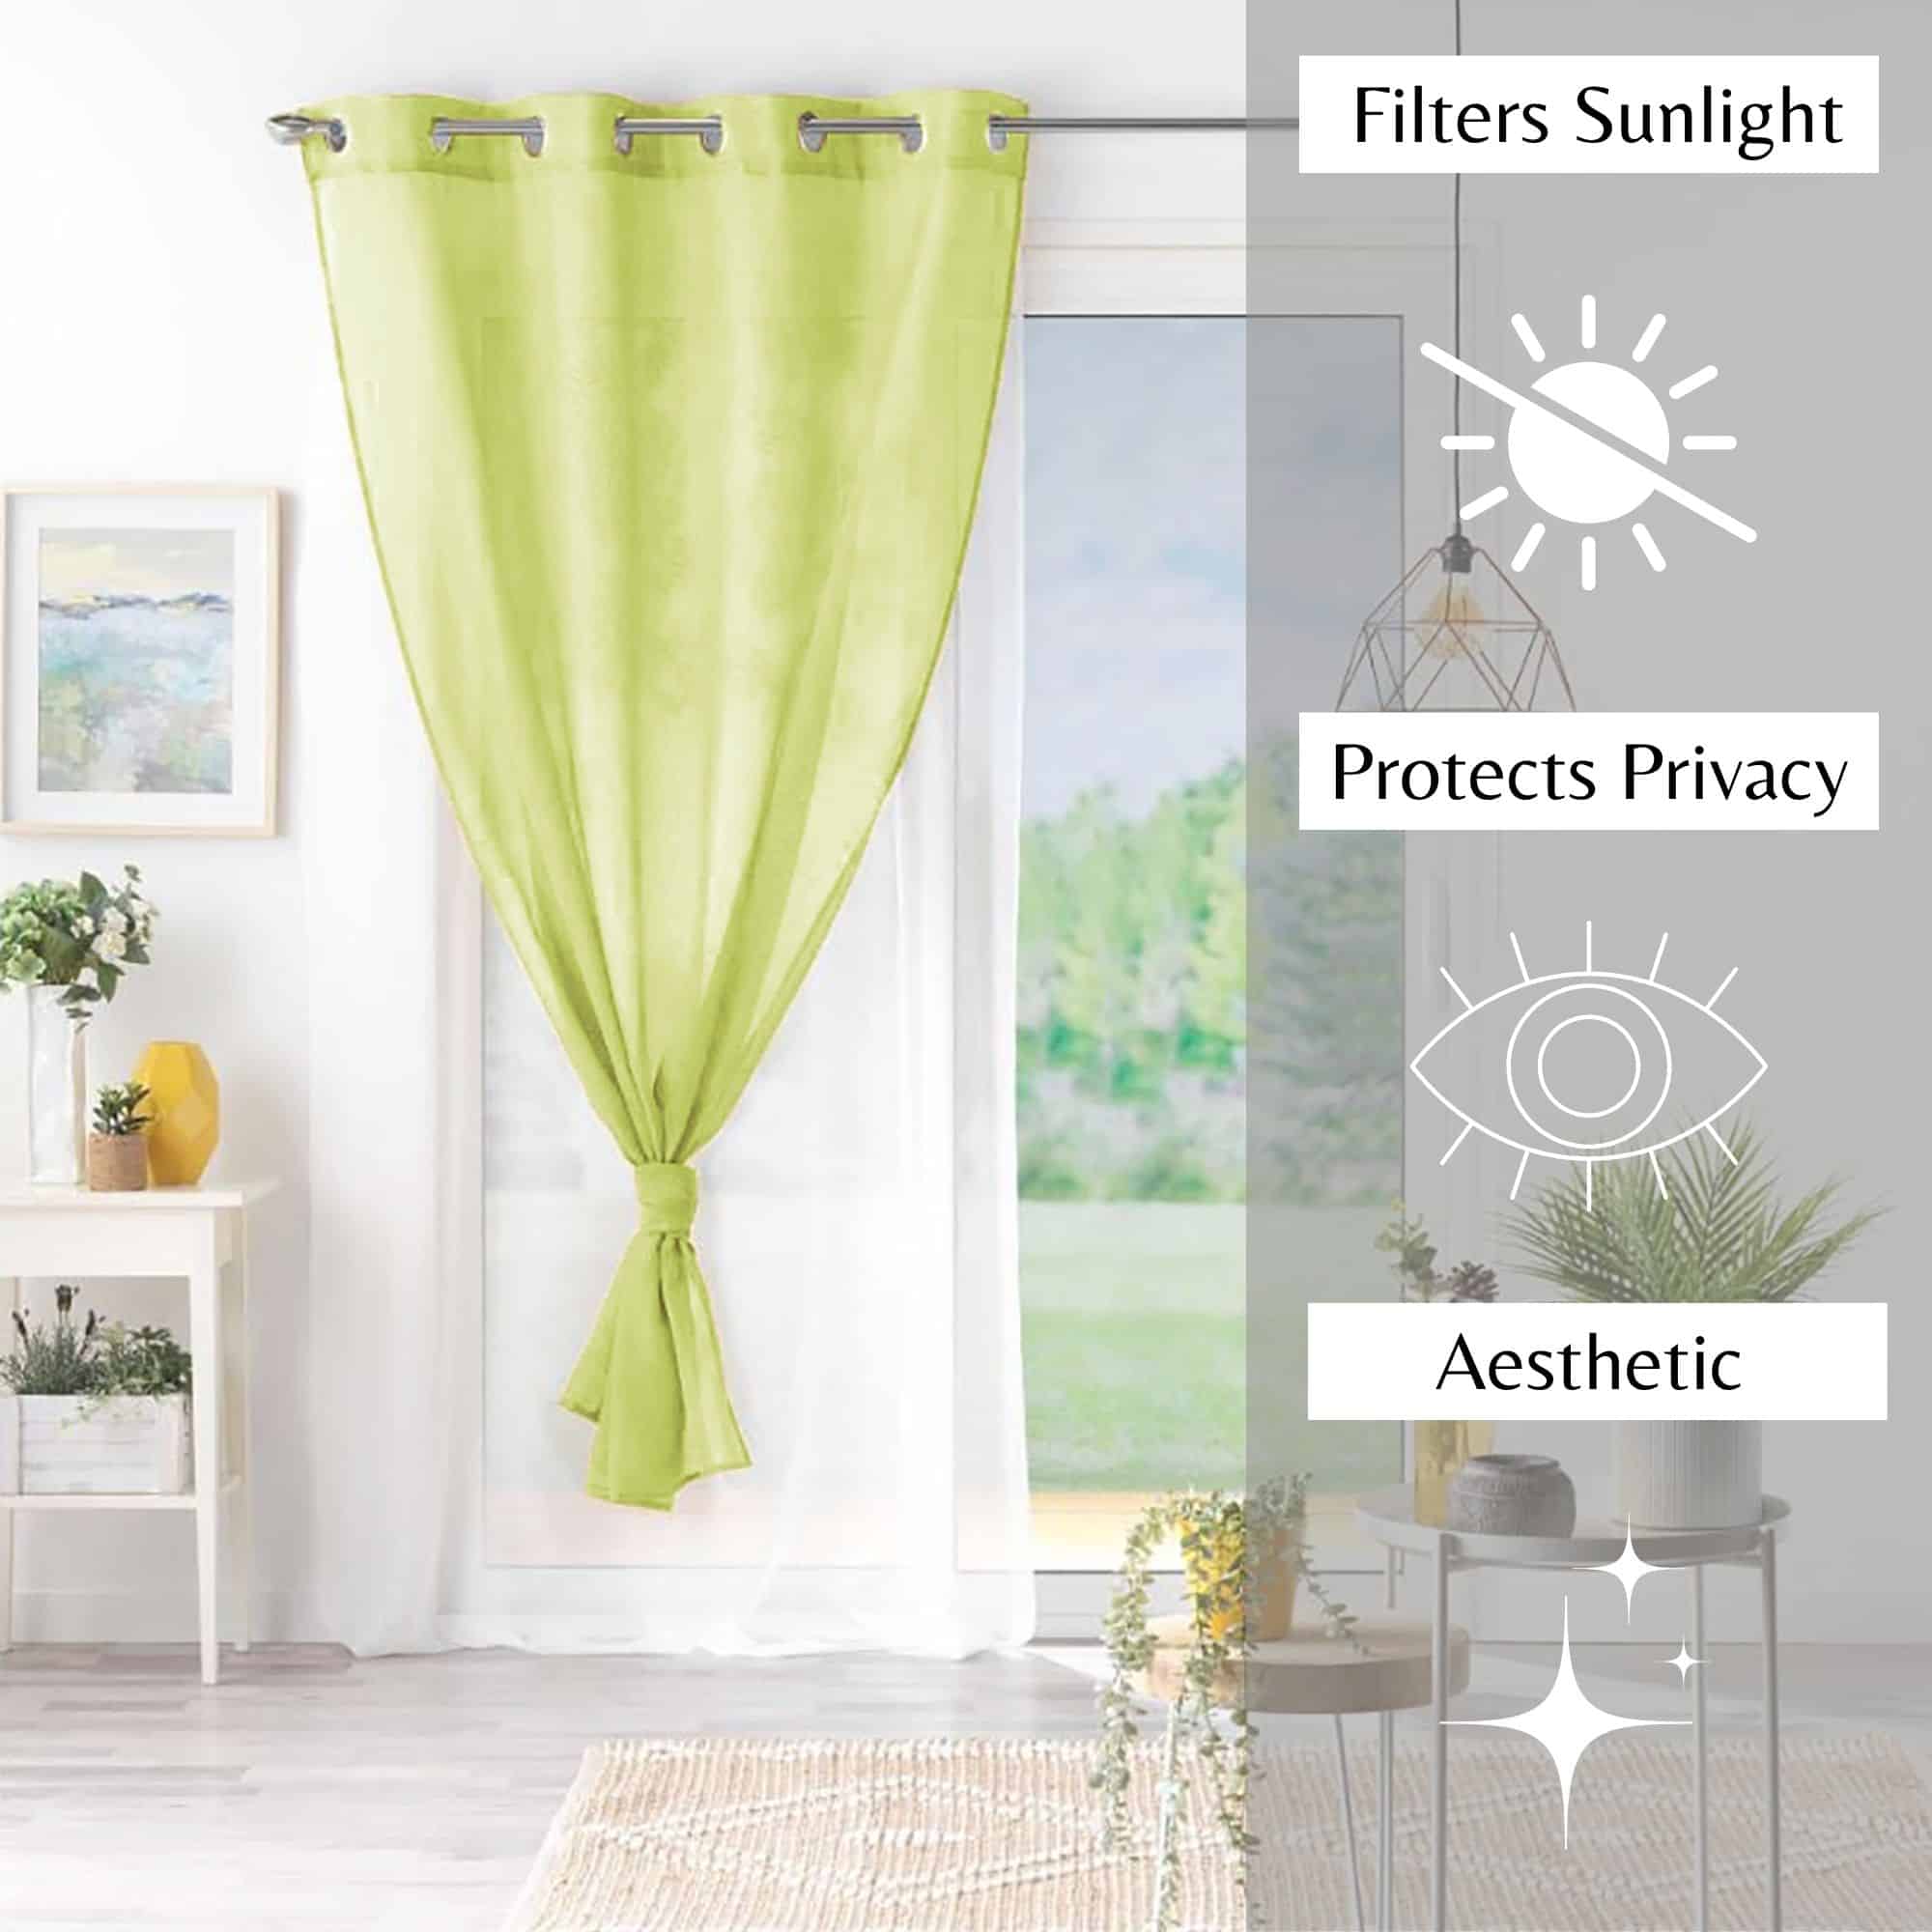 filter sunlight protect privacy aesthetic lime green and white voile curtain panels x 2 for interior design